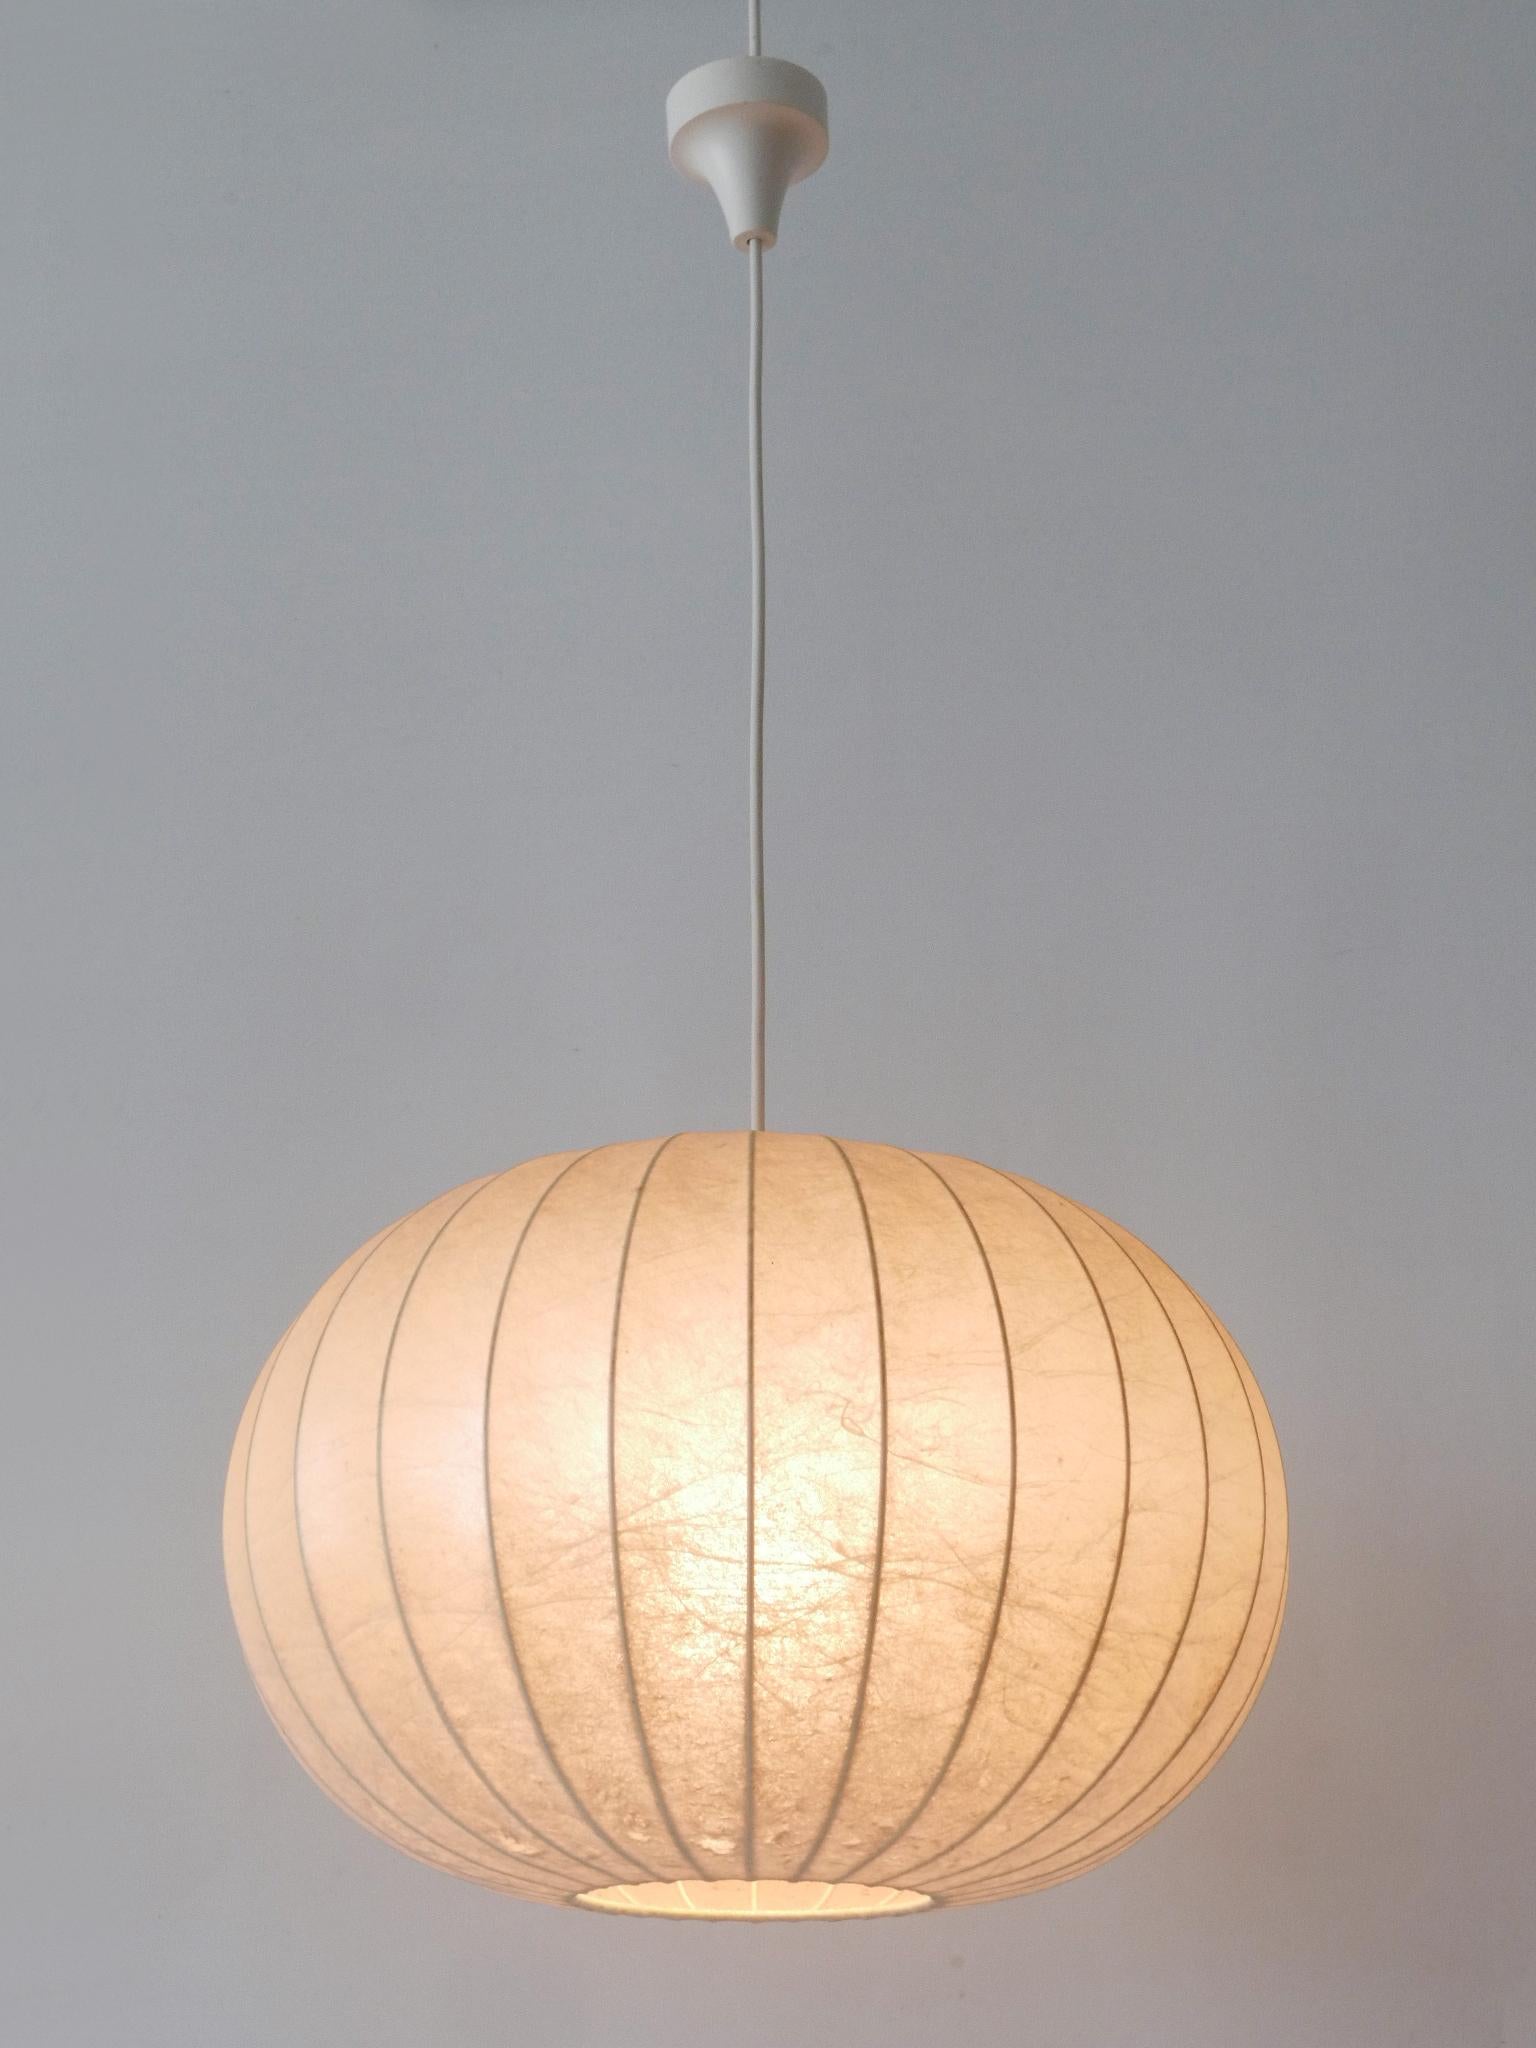 Lovely Midcentury Modern Cocoon Pendant Lamp or Hanging Light Germany 1960s For Sale 5